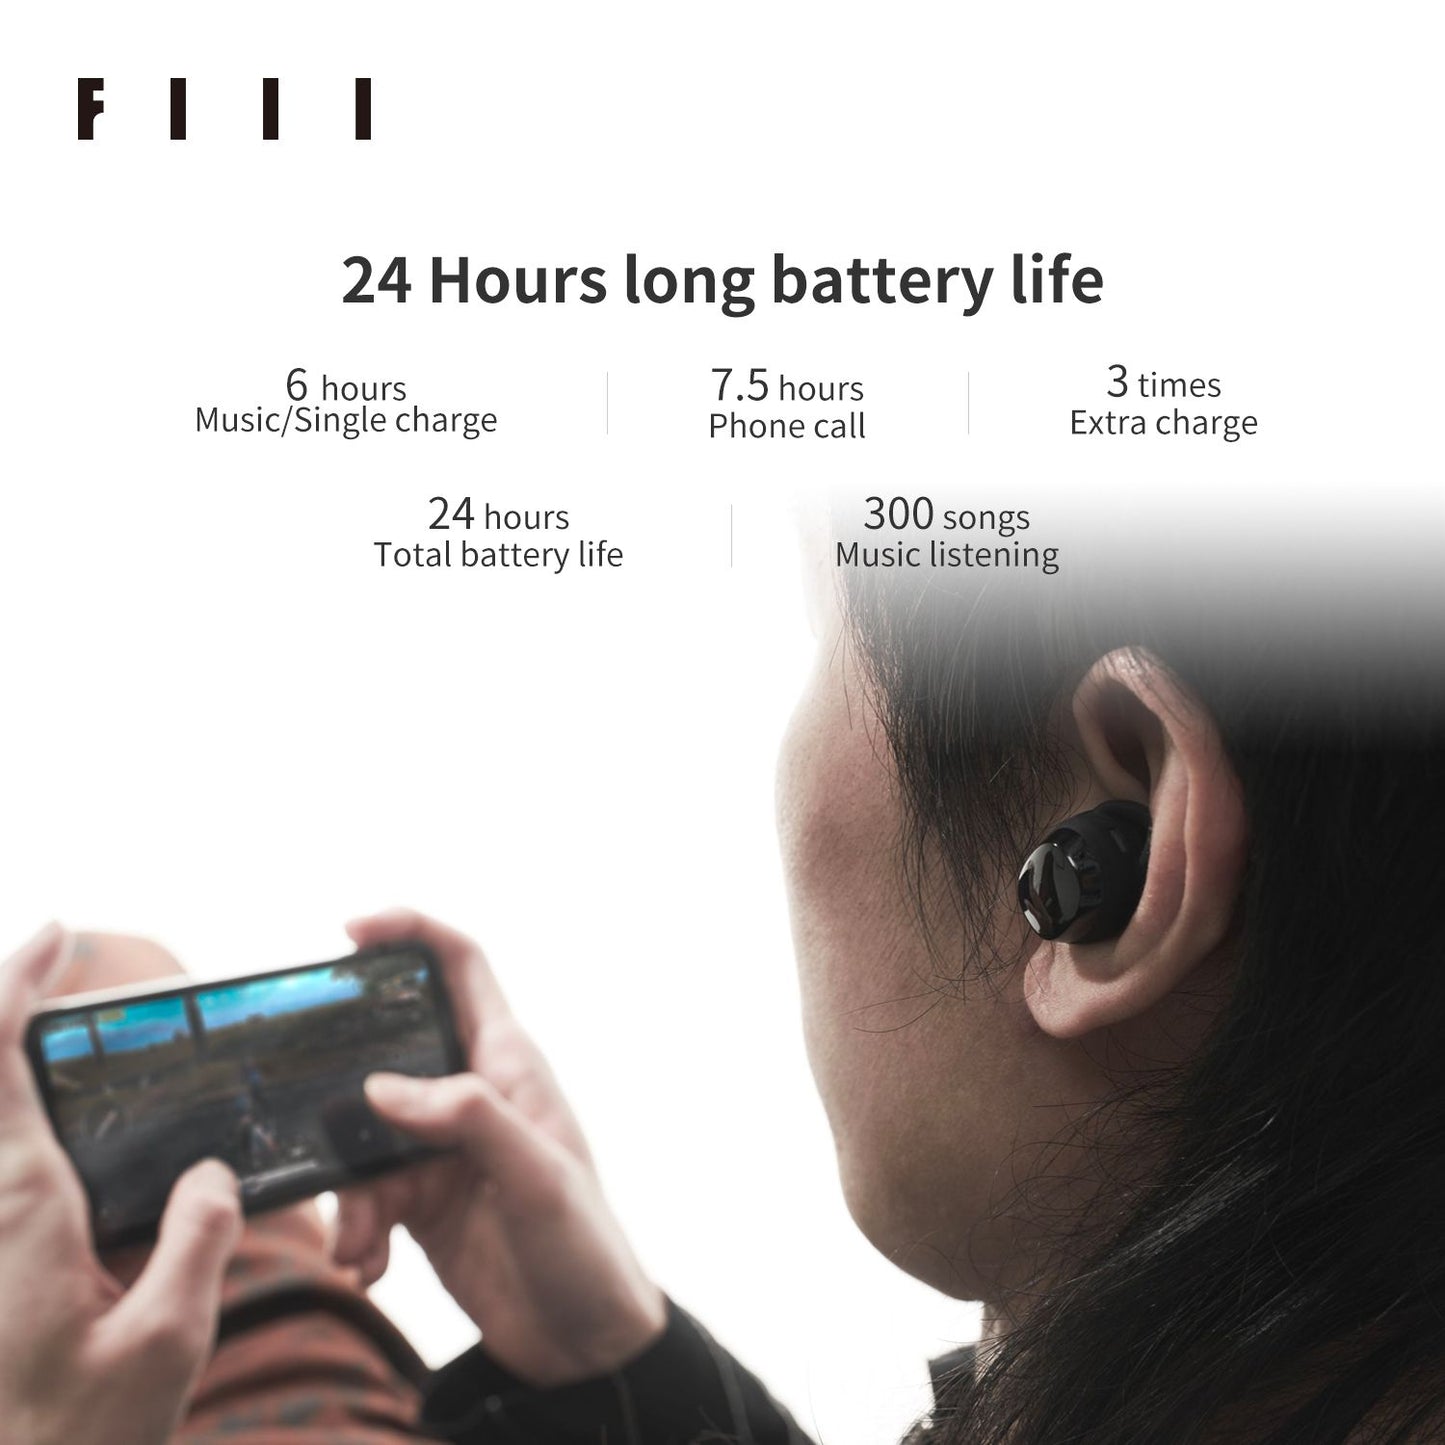 FIIL T1 XS True Wireless Earbuds Bluetooth 5.0 TWS Earbuds, ENC Call Noise Cancellation Earbuds